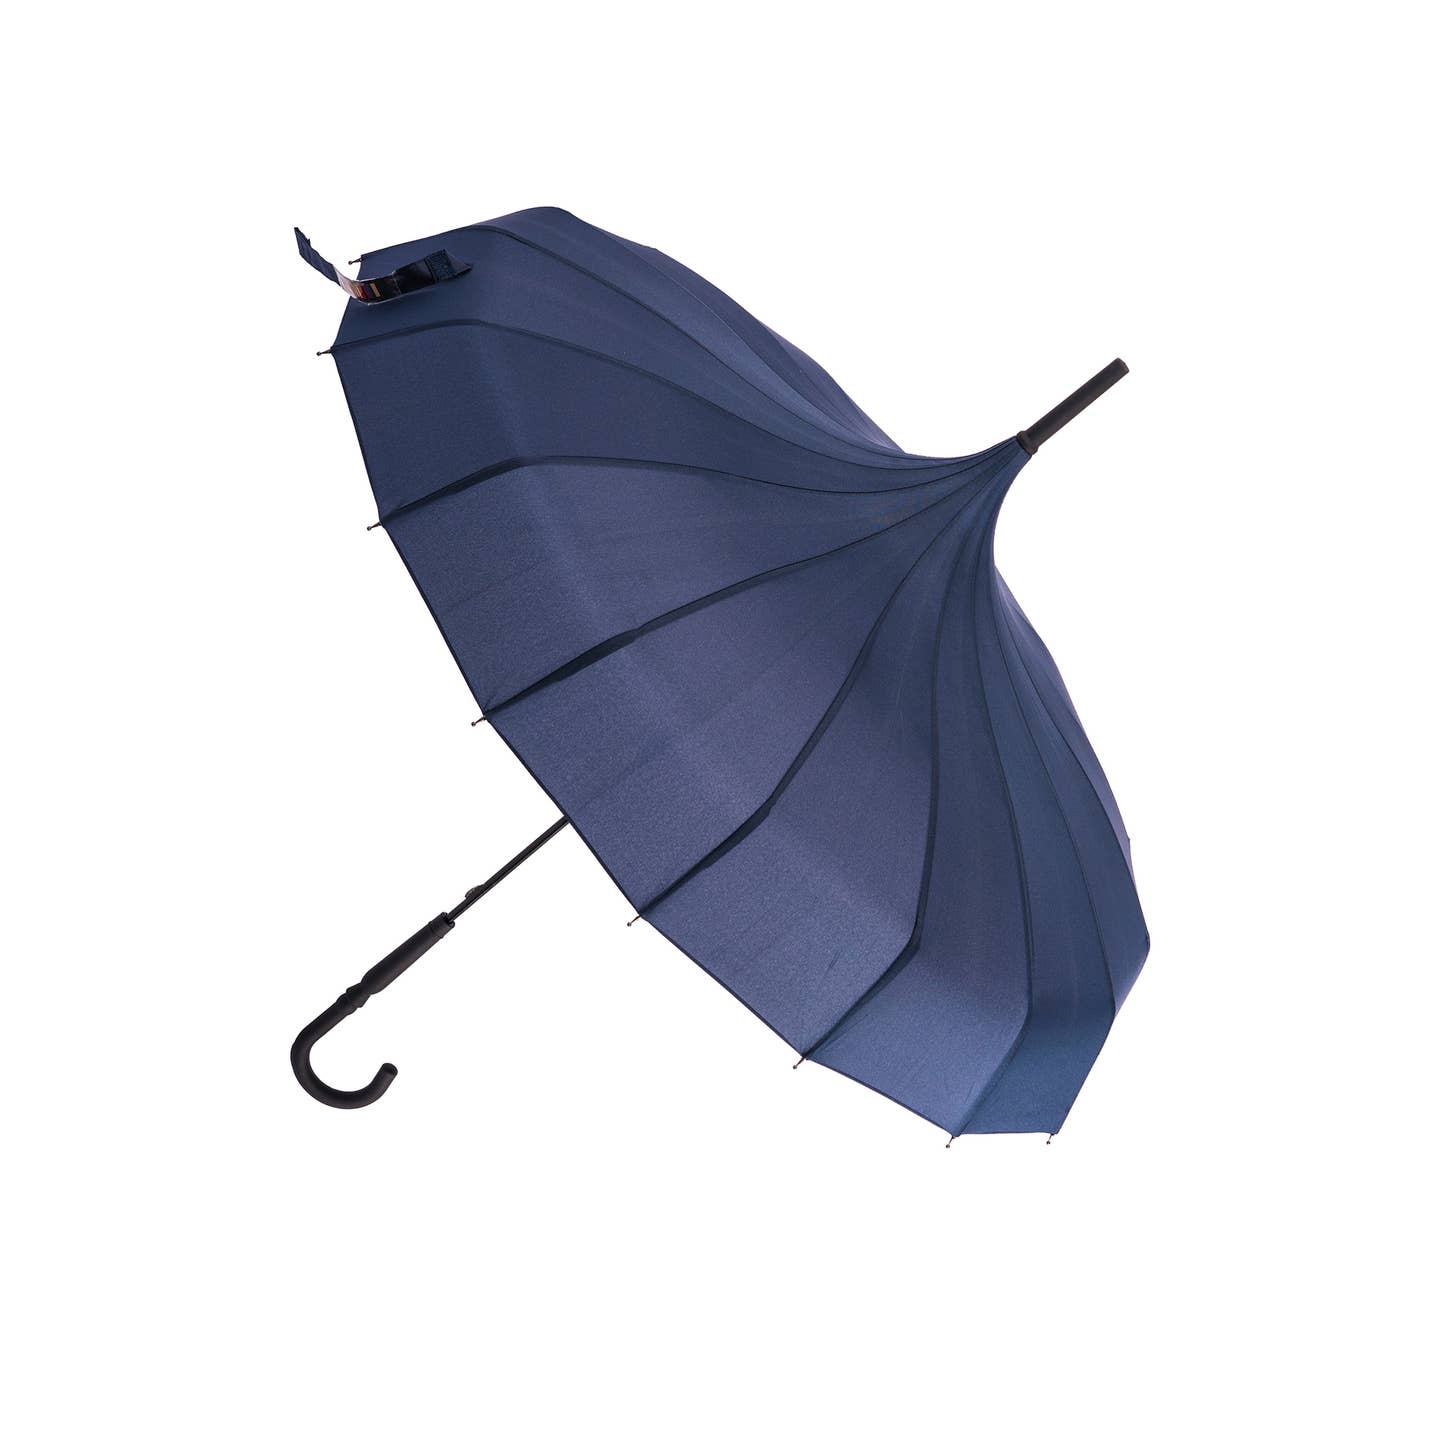 Soakes pagoda umbrella navy new in £21.95 without postage